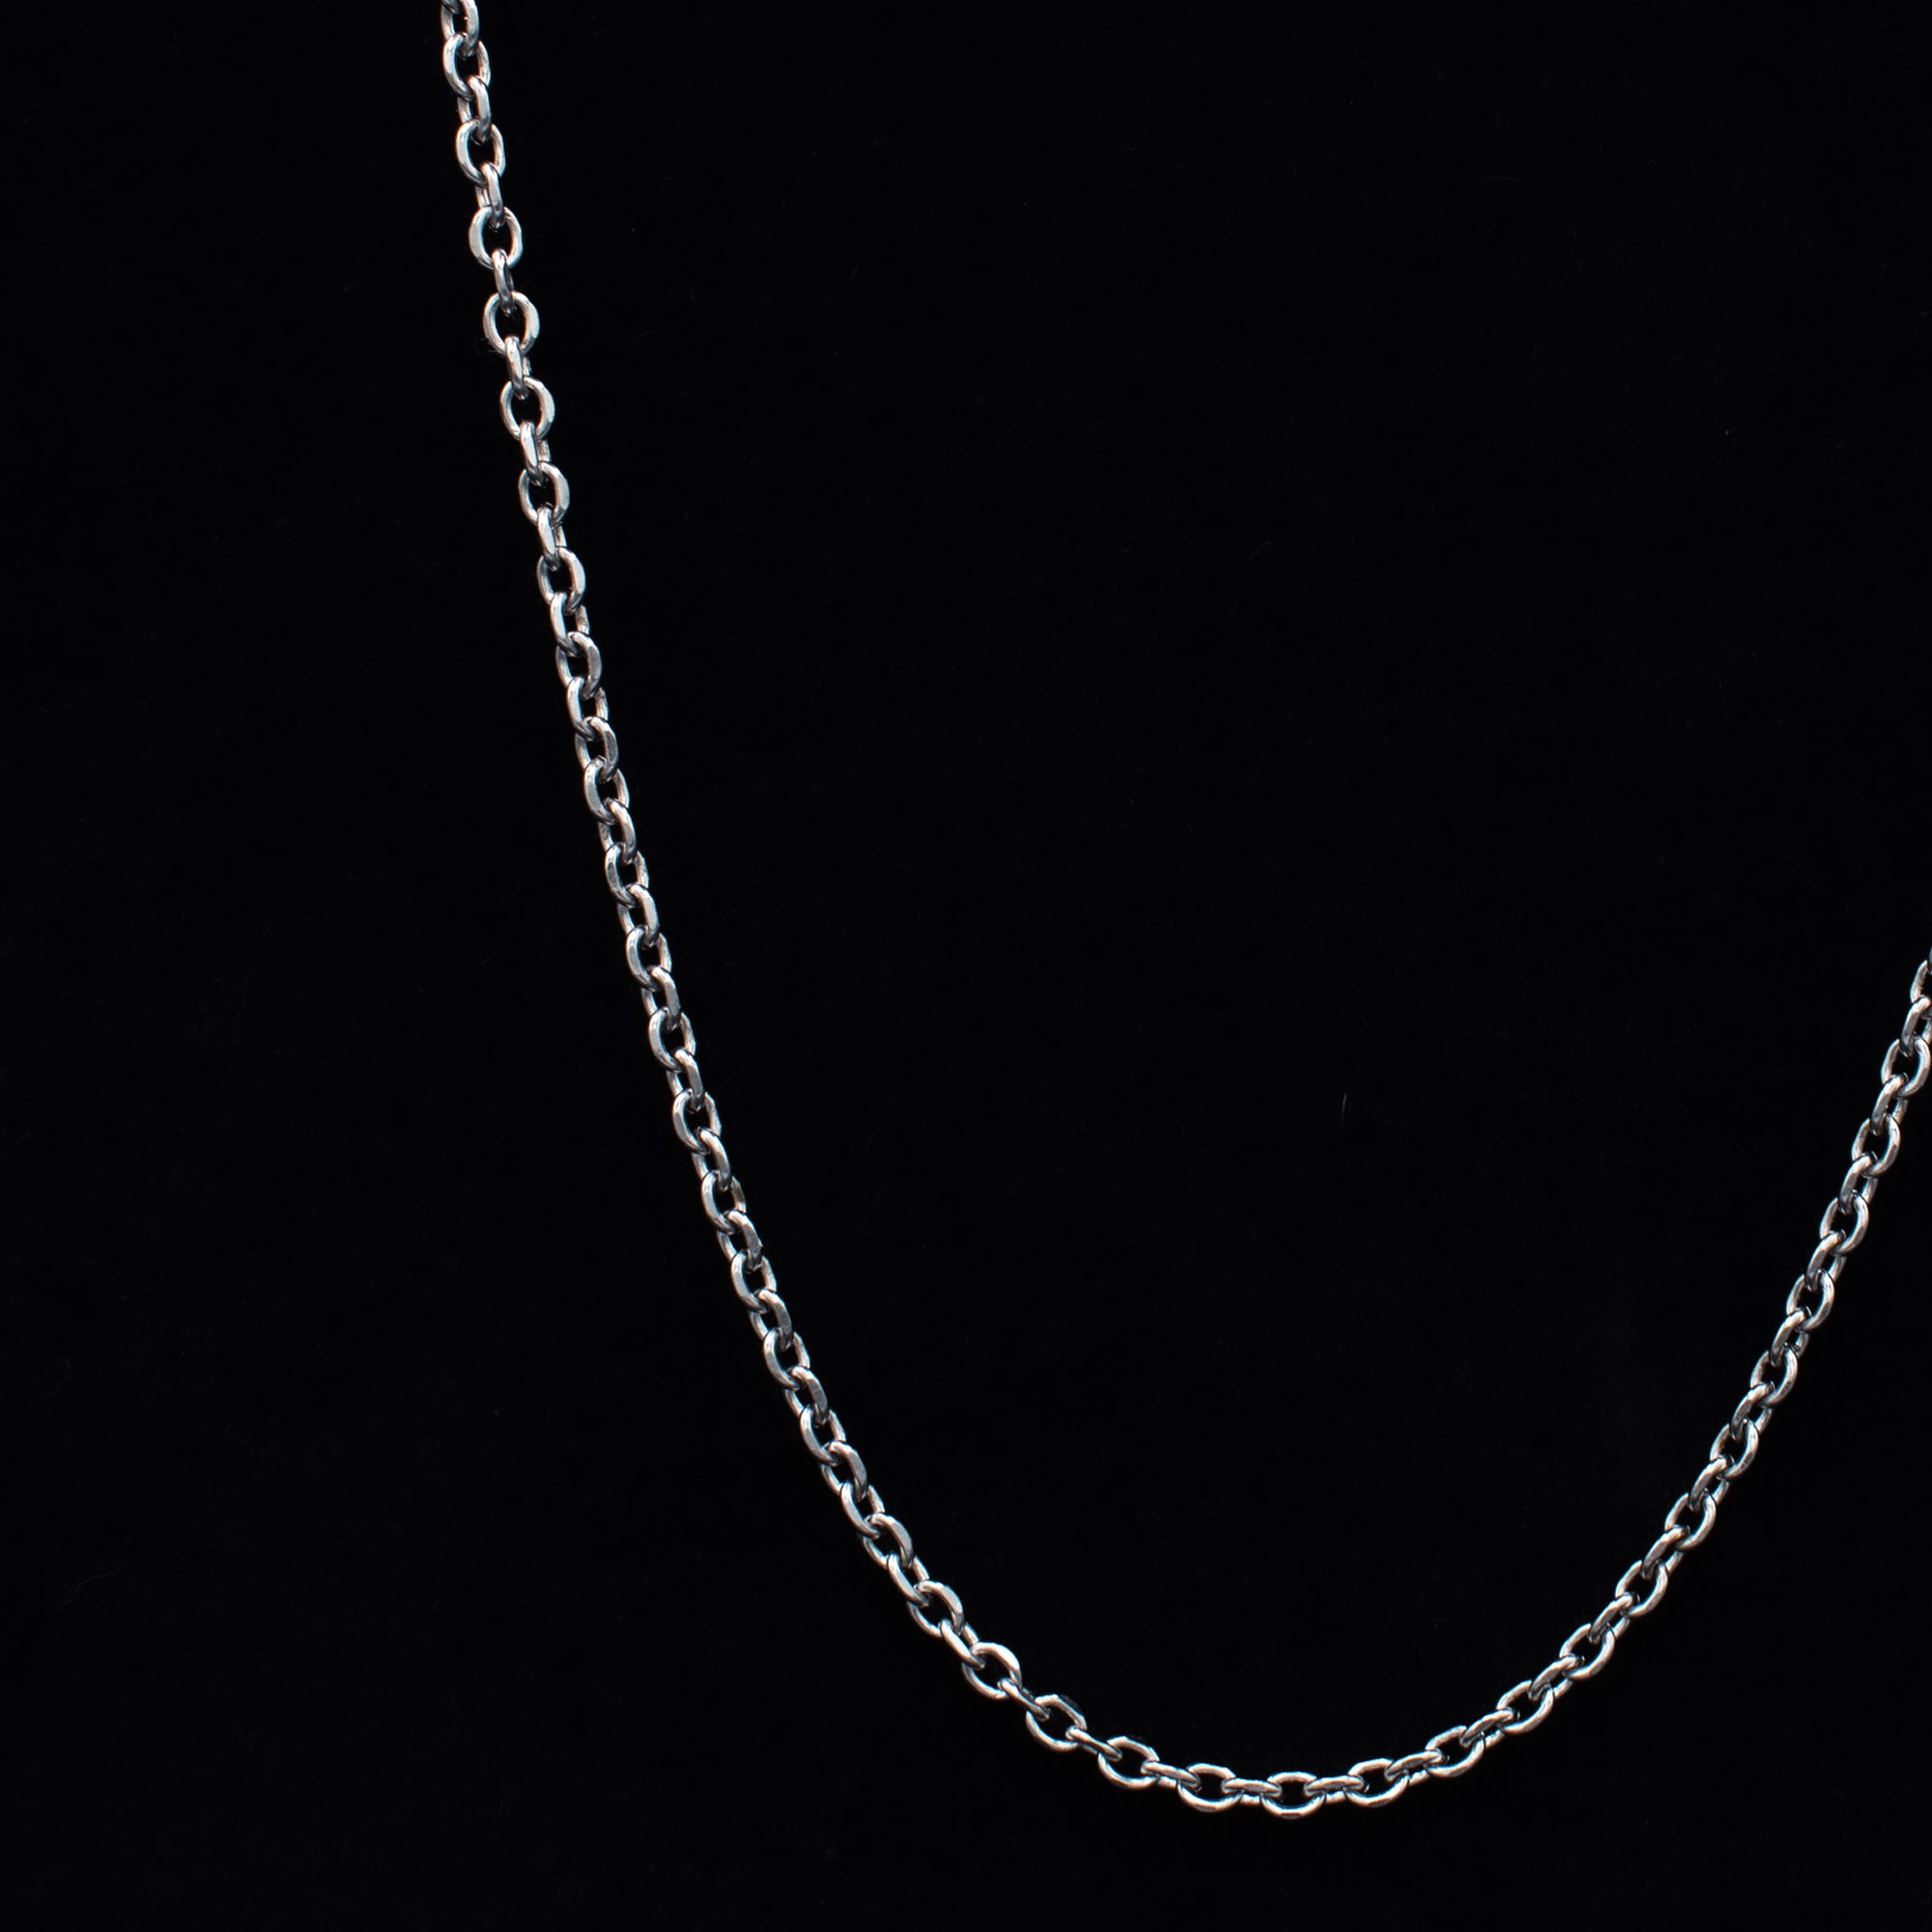 Cable Chain Necklace - (Silver) 4mm